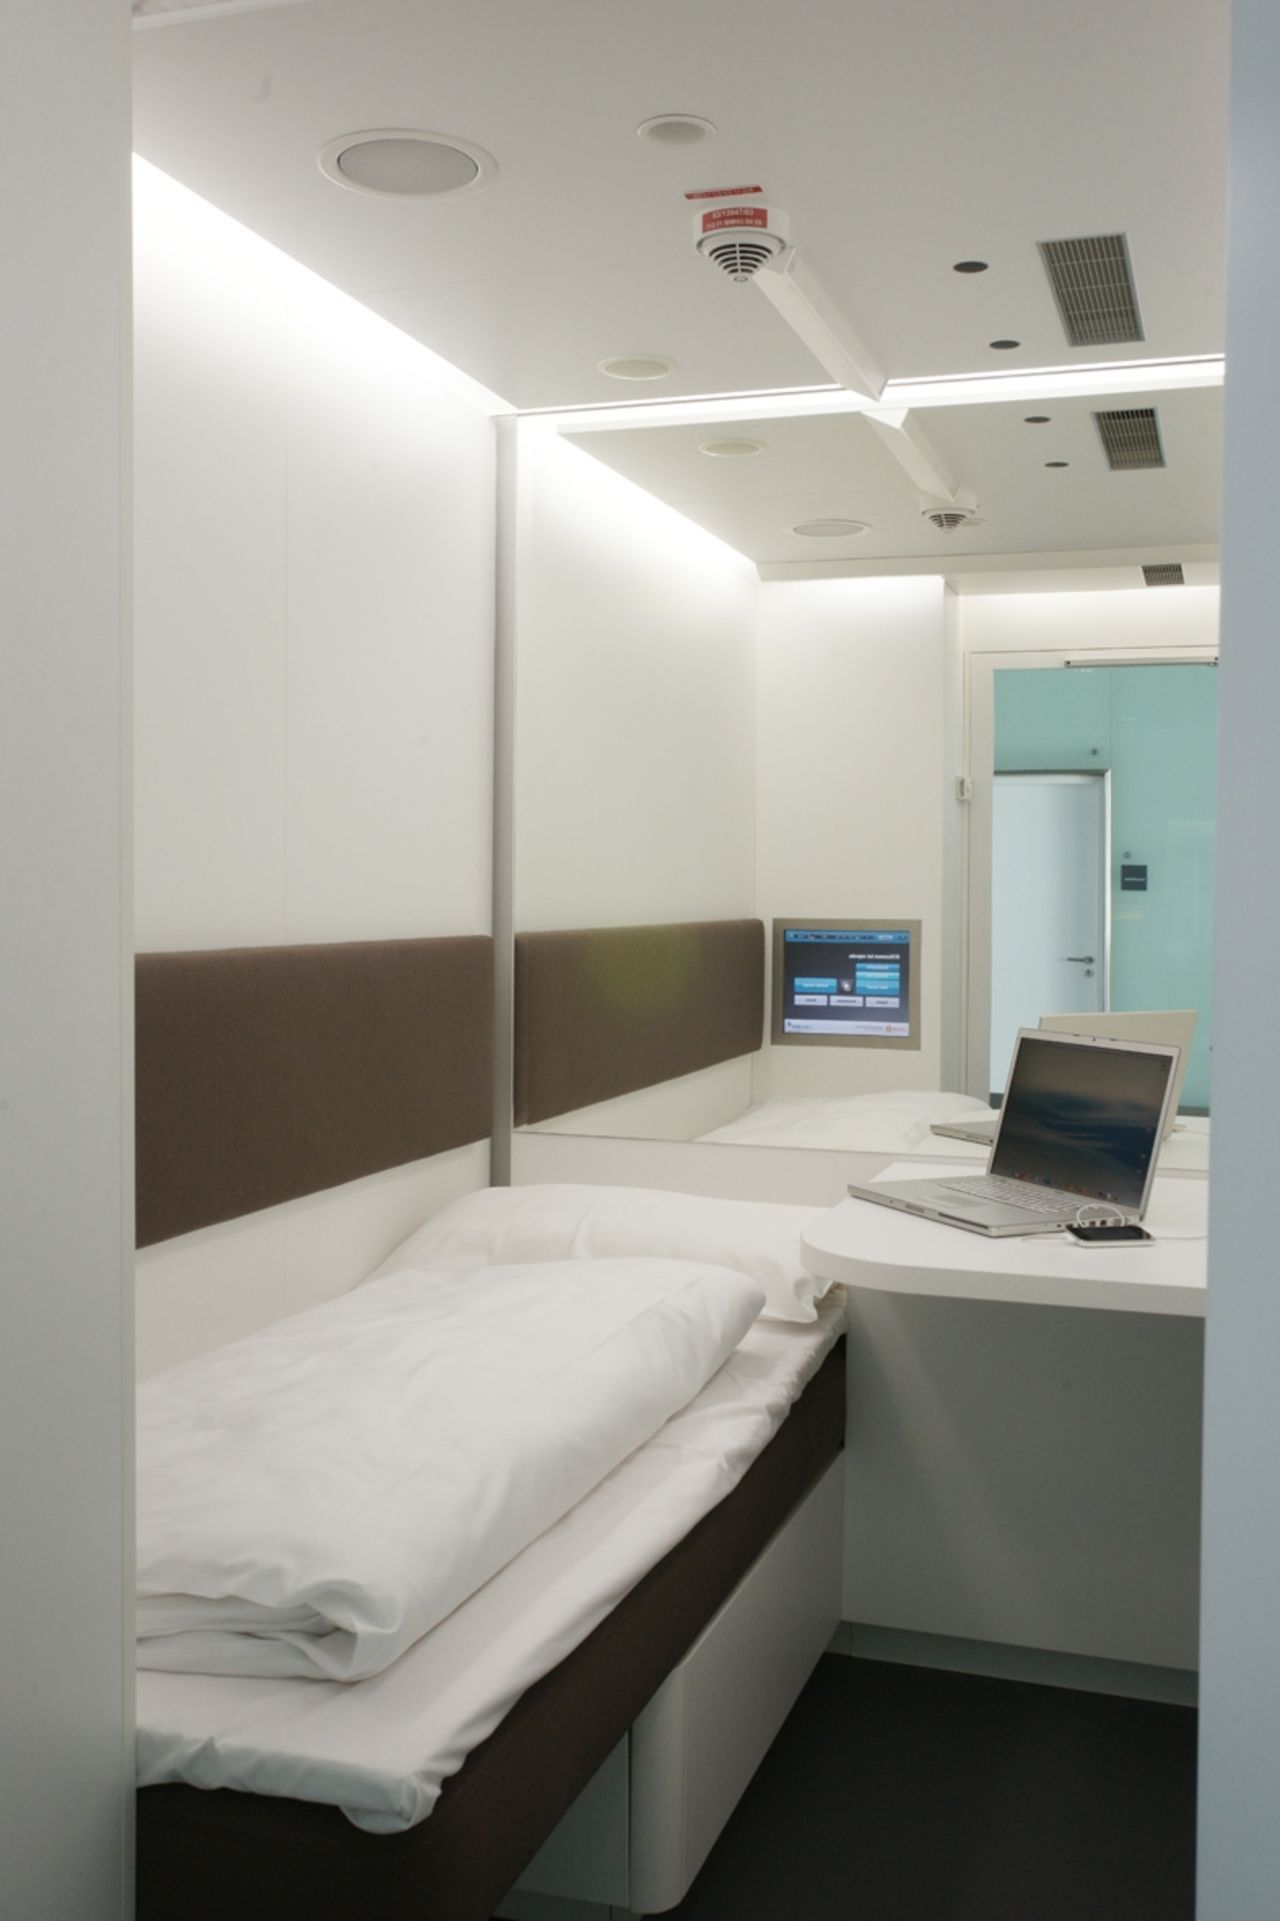 Napcabs contain a bed, desk, air conditioning, internet access and a TV. For a toilet and shower, travelers need to use the public airport facilities.